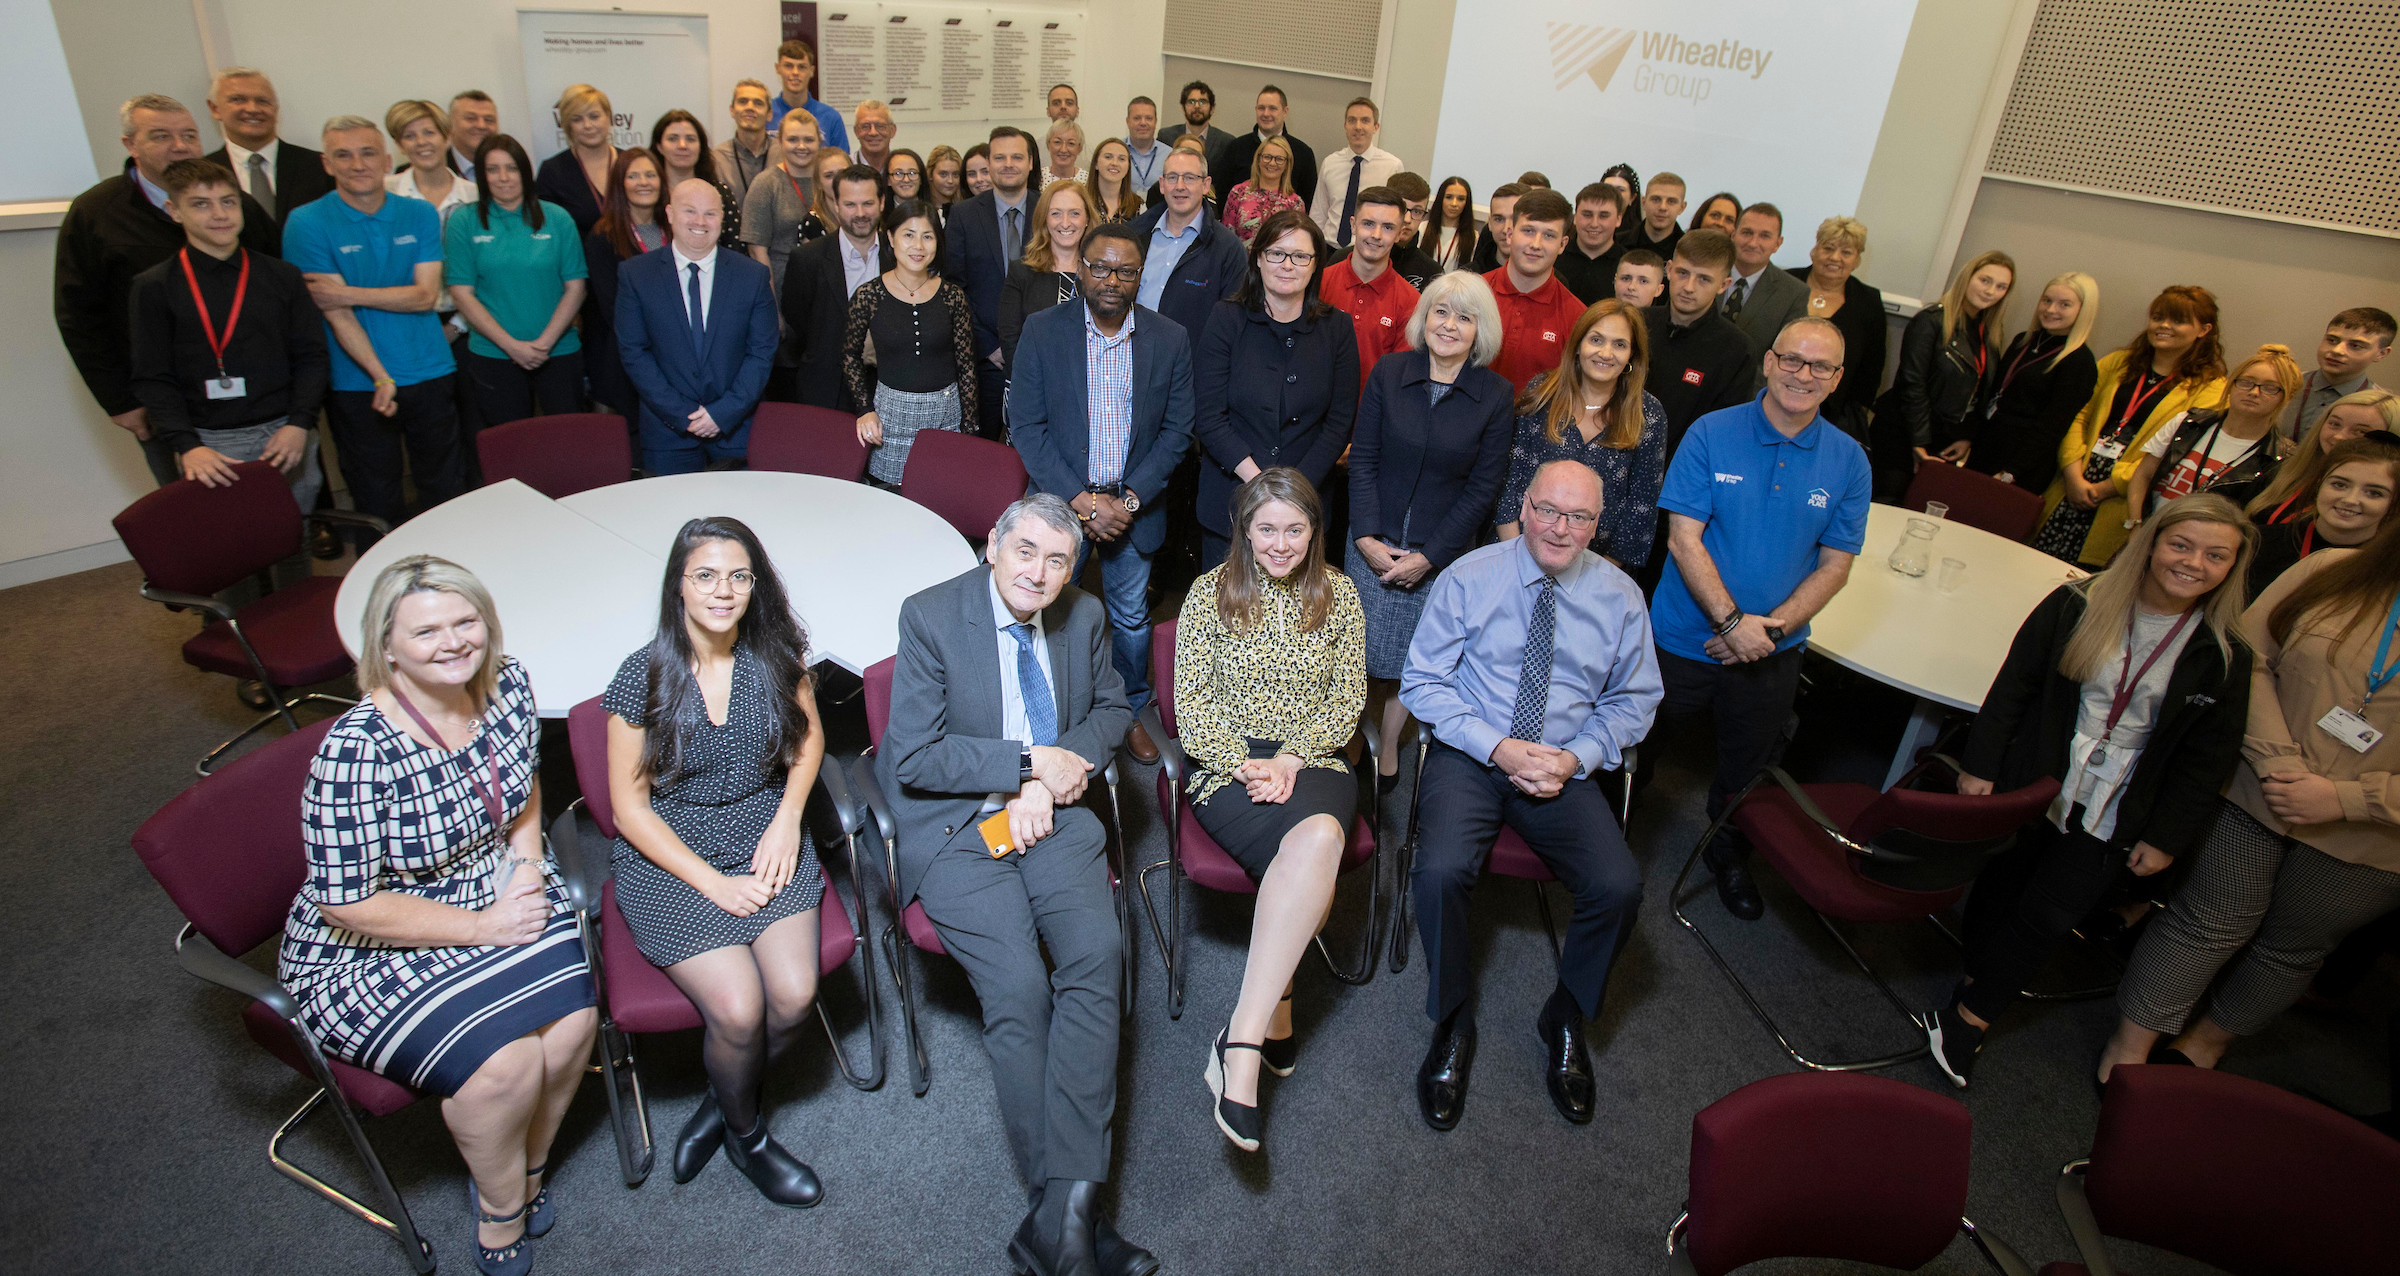 Wheatley programme creates almost 800 jobs and training places in first year